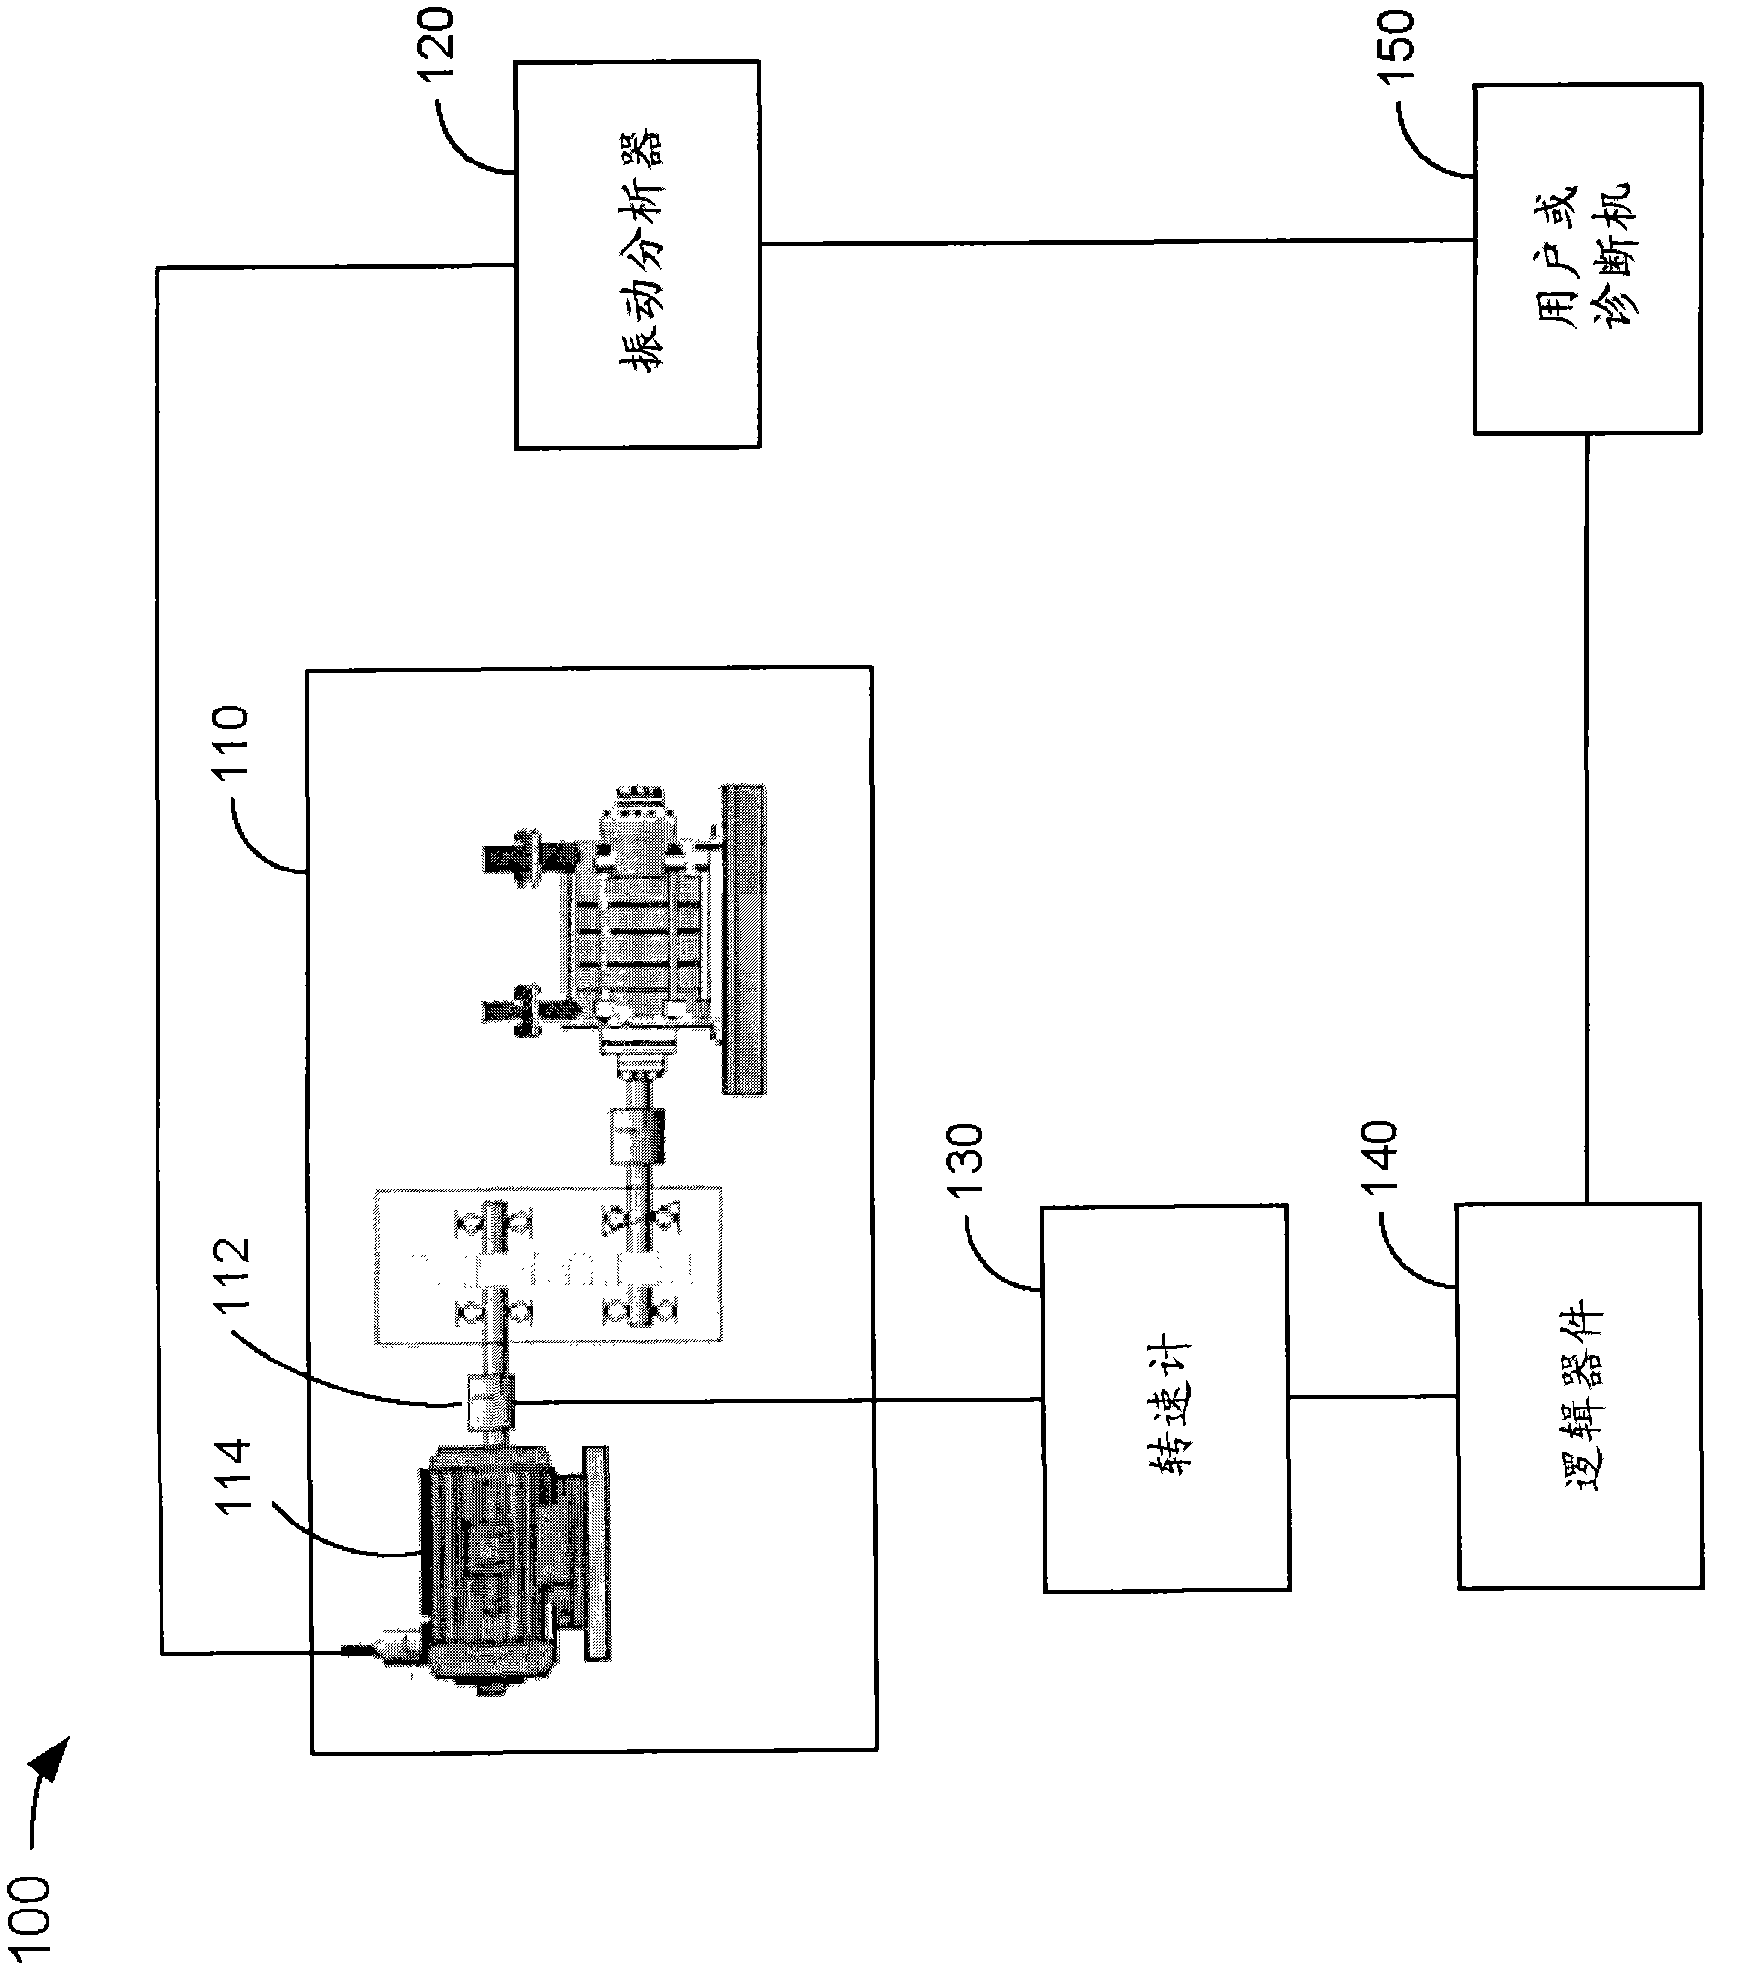 System and method for vibration analysis and phase analysis of vibration waveforms using dynamic statistical averaging of tachometer data to accurately calculate rotational speed